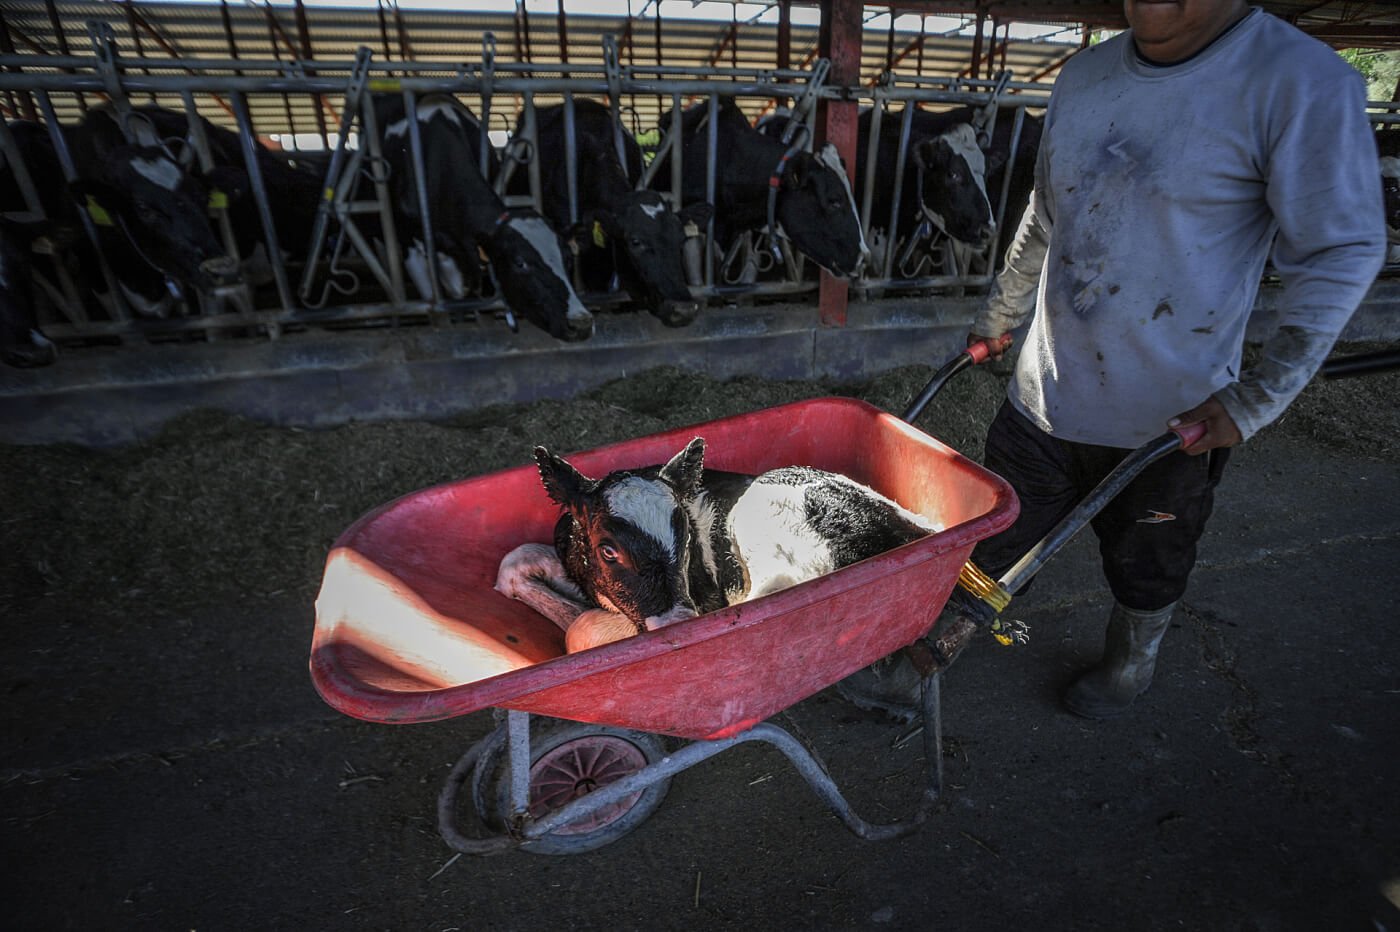 A newborn calf is wheeled away from her mother to the veal crates.